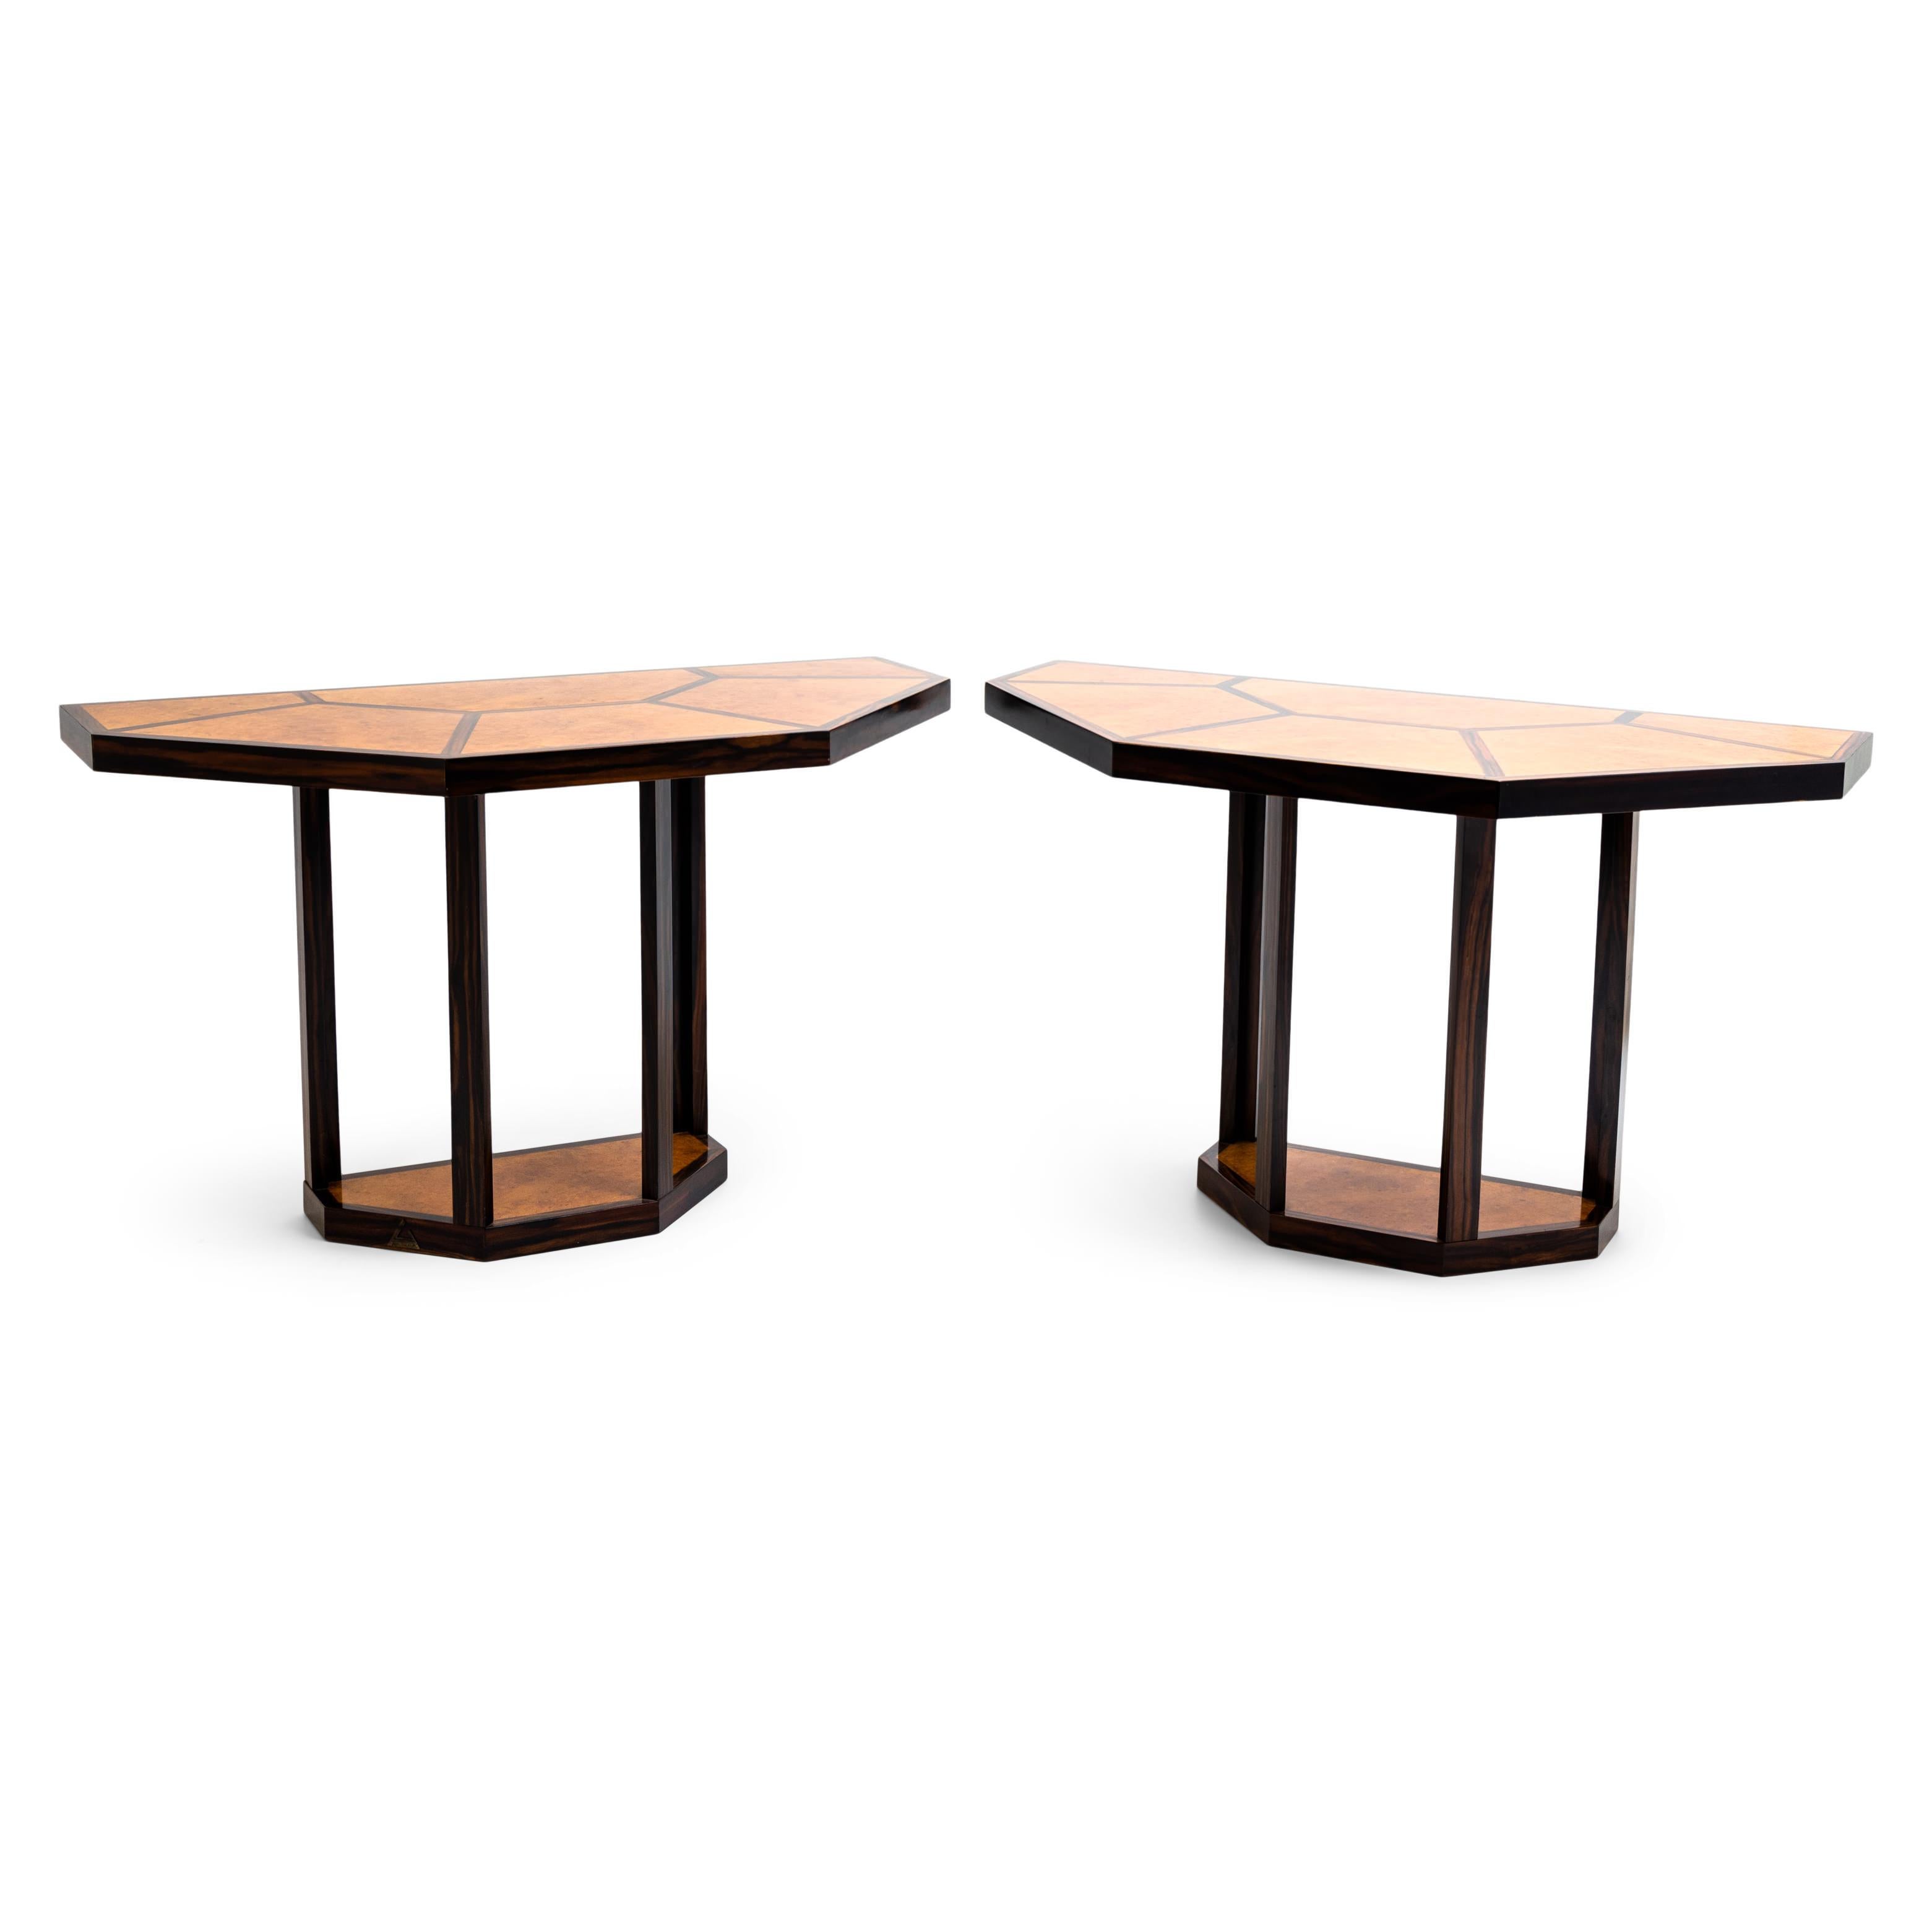 'Puzzle' table by Gabriella Crespi in thuja veneer. Table(s) can be used in various configurations. Larger dining table, smaller dining table or pair of consoles. From it largest at 66¼